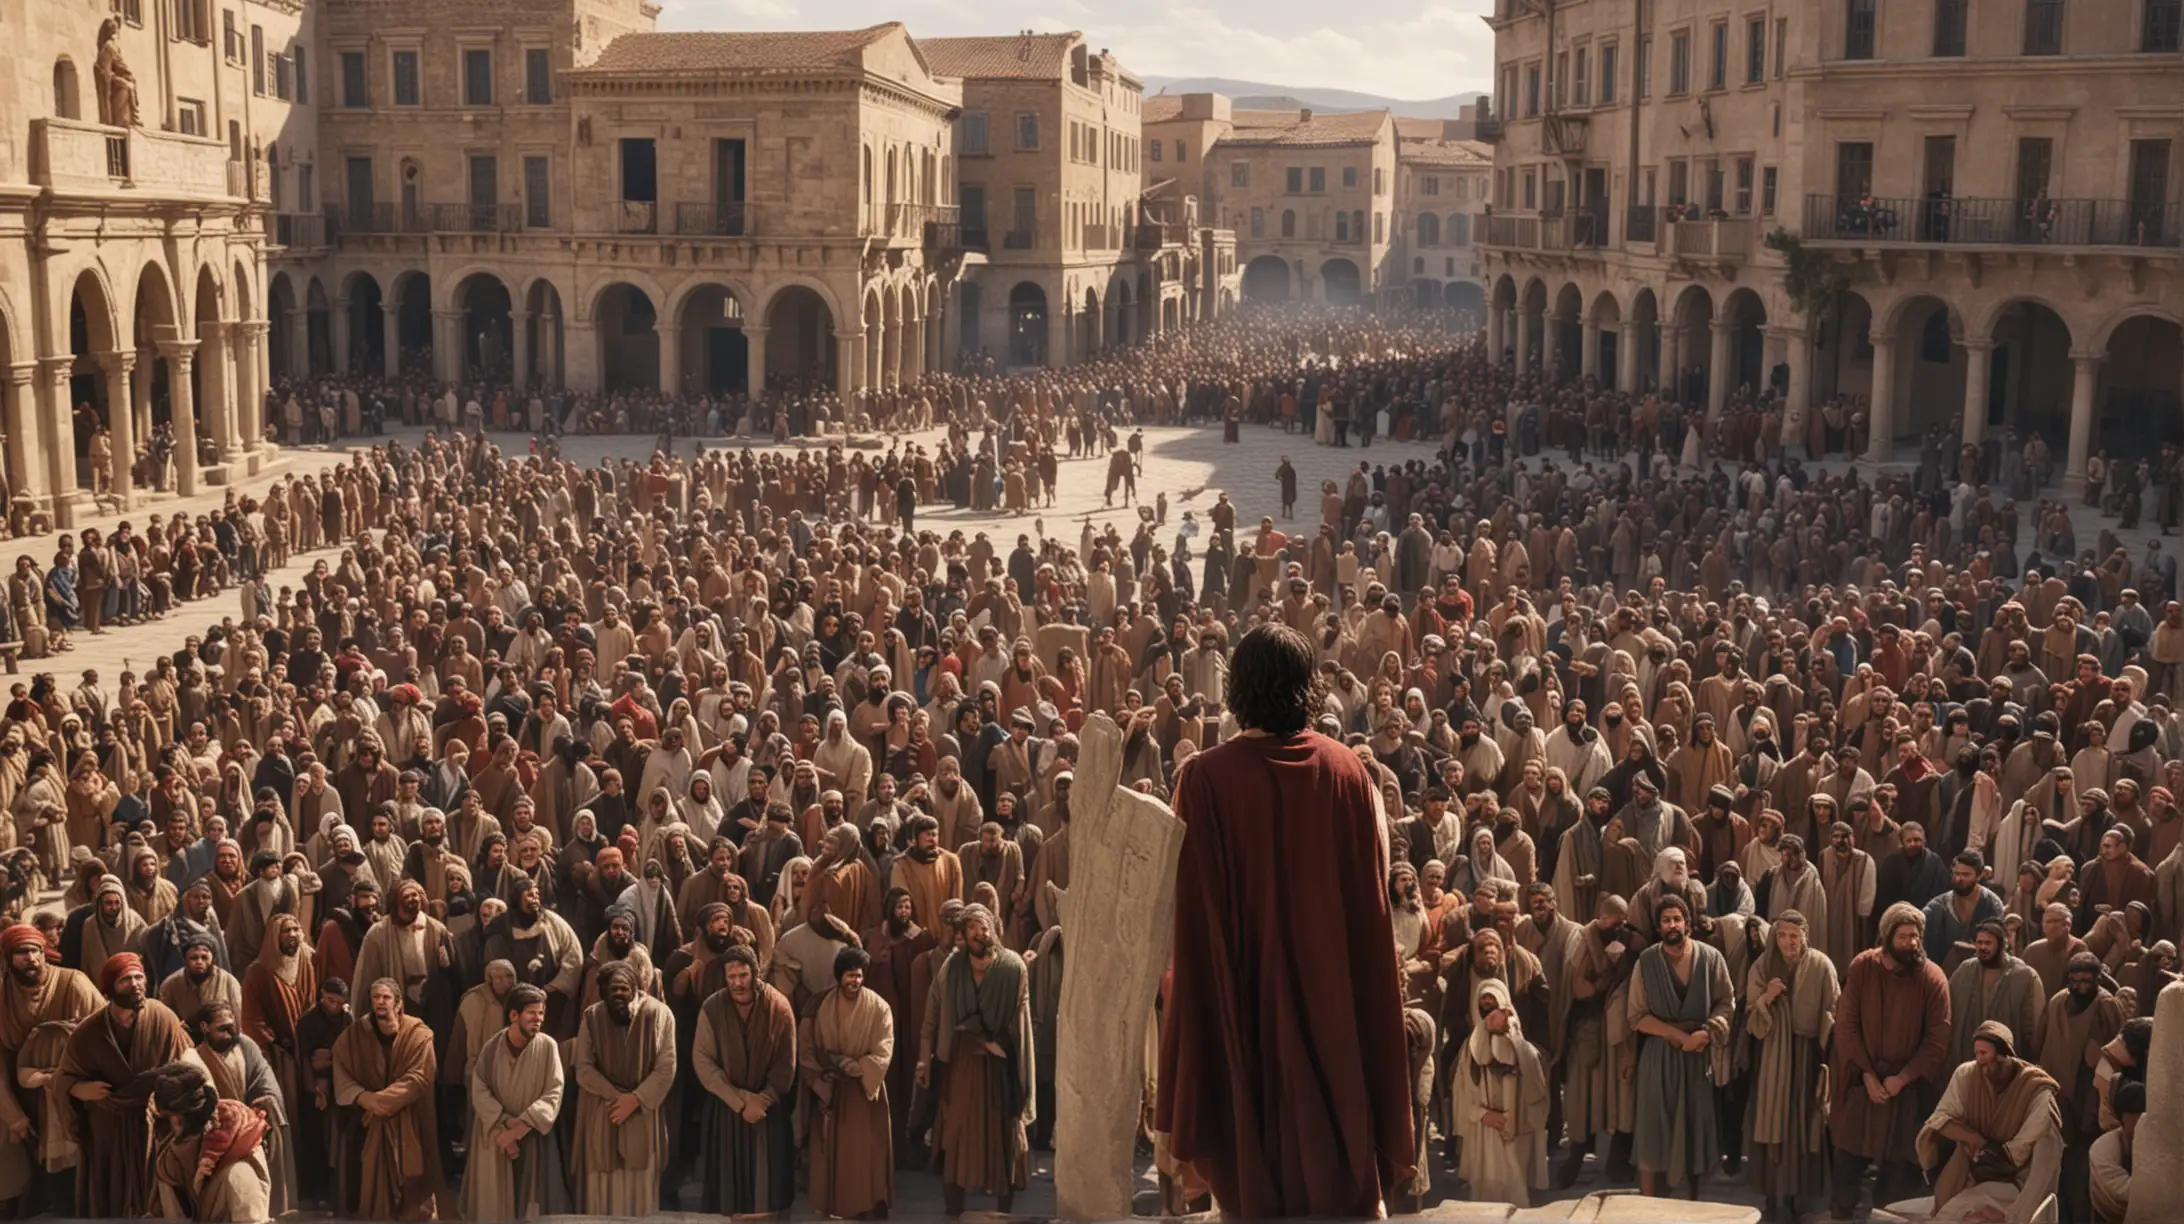 A view from Behind Ezra from the Bible, standing in a town square addressing a group of people.